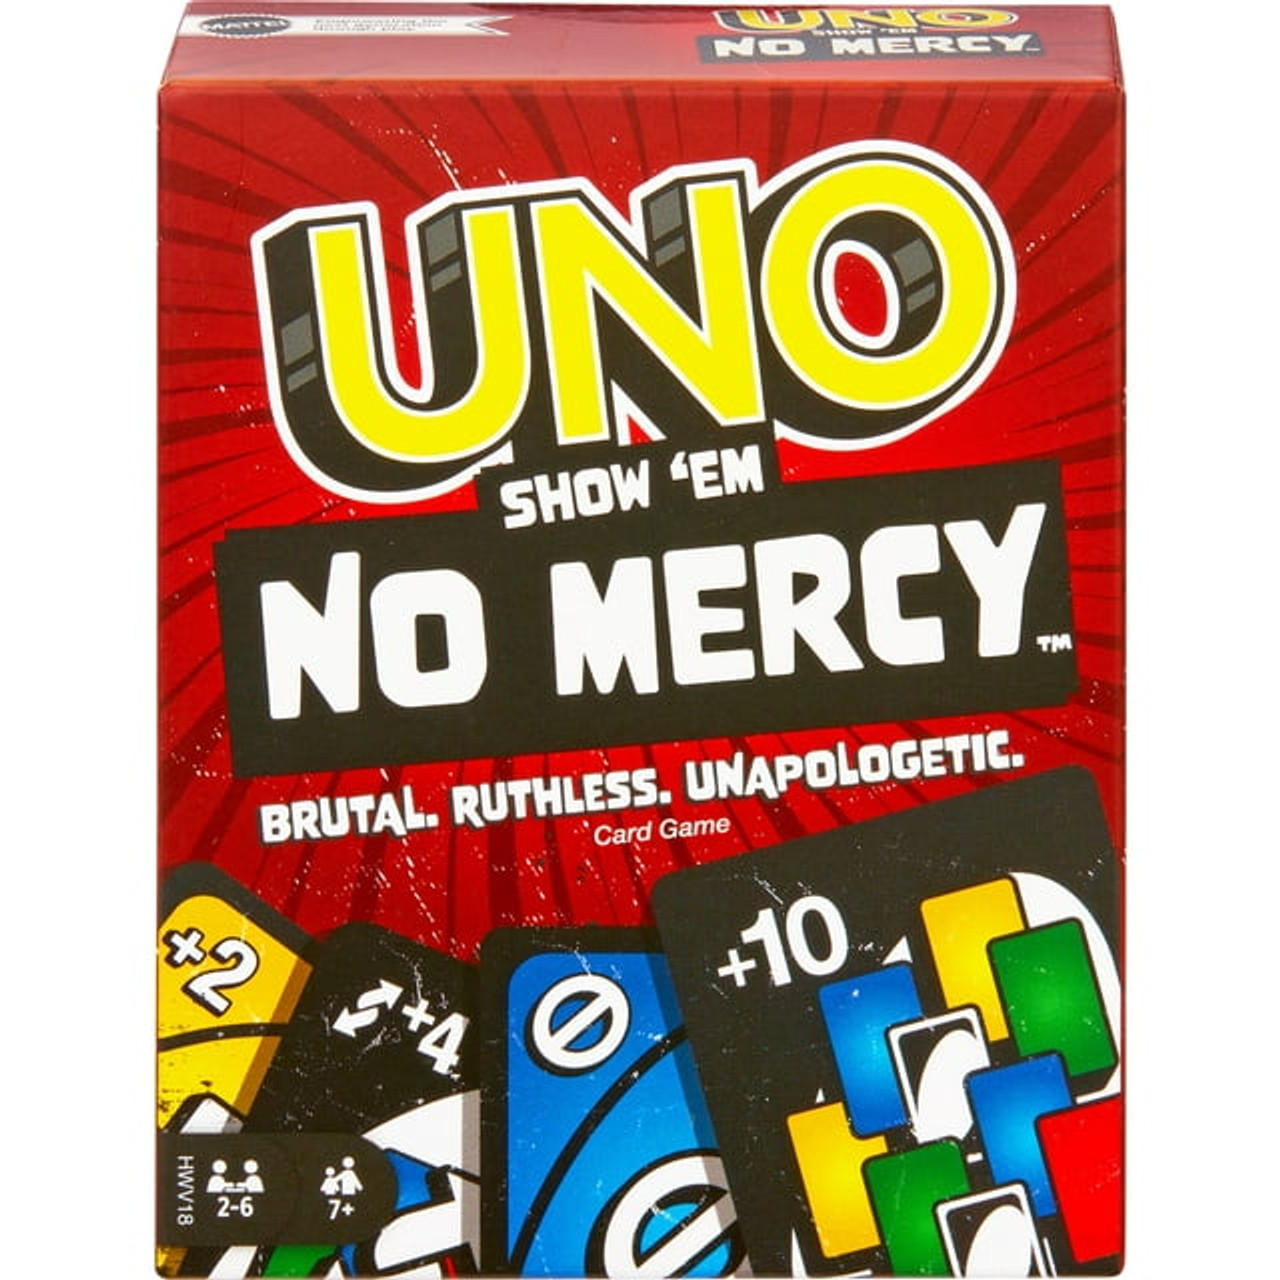 https://cdn11.bigcommerce.com/s-9im8f1/images/stencil/1280x1280/products/14446/22203/UNO-Show-em-No-Mercy-Card-Game-for-Kids-Adults-Family-Night-Parties-and-Travel_4b6b2f16-5de9-45bf-8806-b4987073d637.75a39bf7478f025258ca16b41f460d2c__13571.1695135688.jpg?c=2